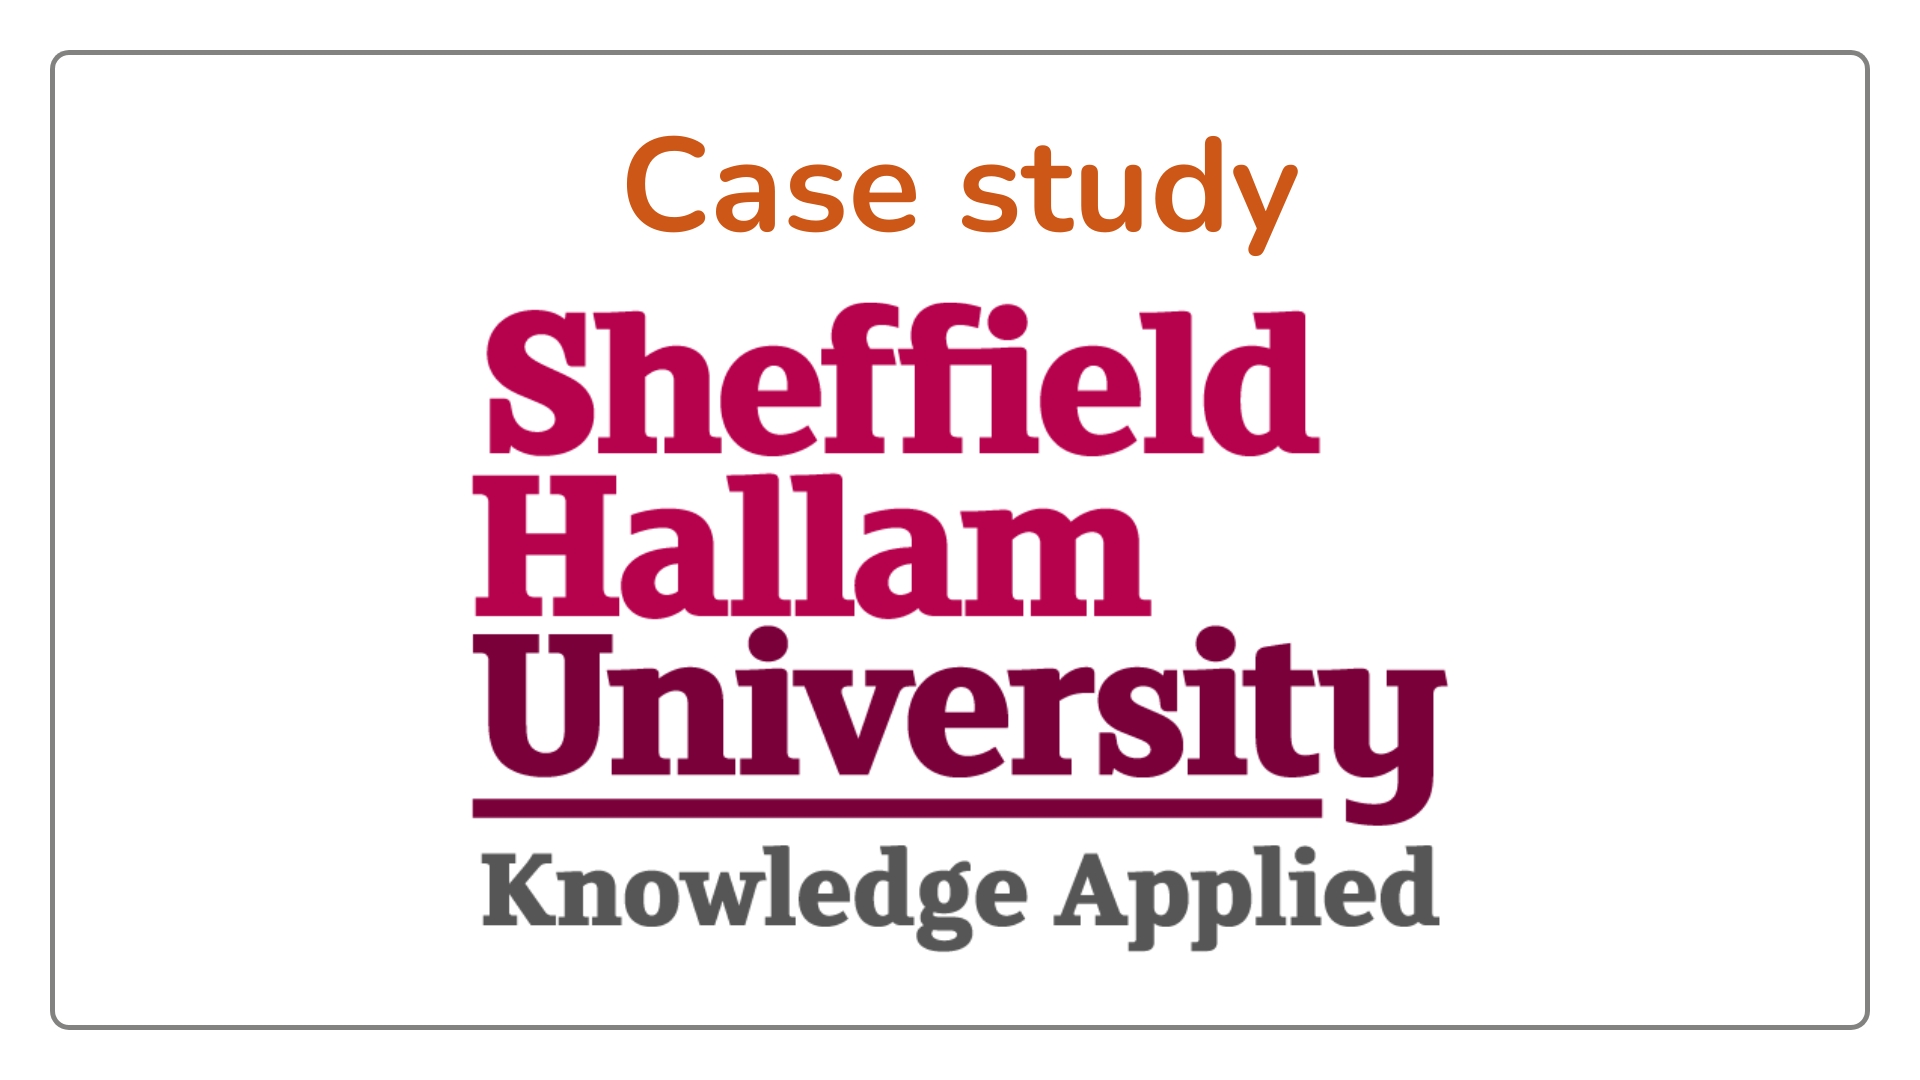 Preferred supplier success – Locum Head of Legal recruited within 3 weeks for Sheffield Hallam University